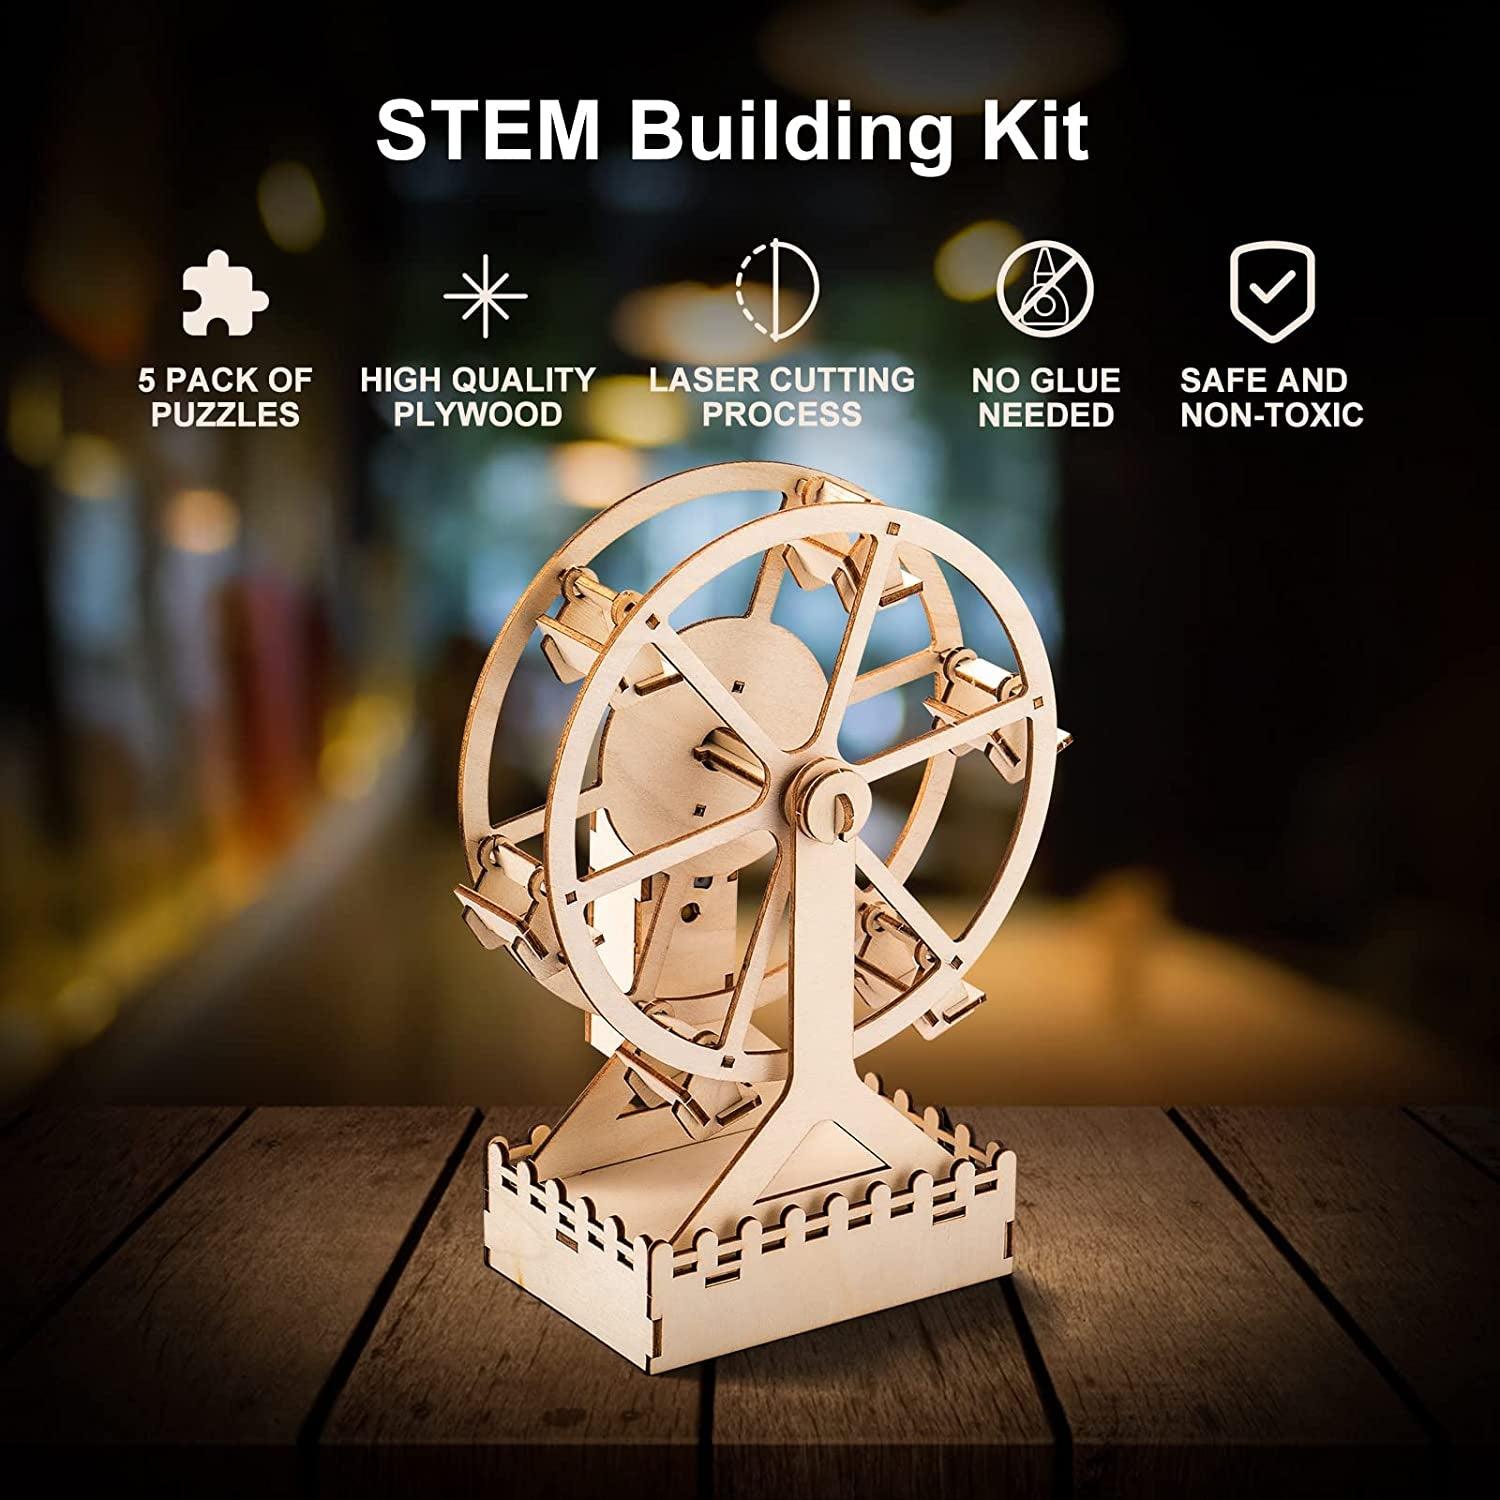 4 in 1 STEM Kits, STEM Projects for Kids Ages 8-12, Assembly 3D